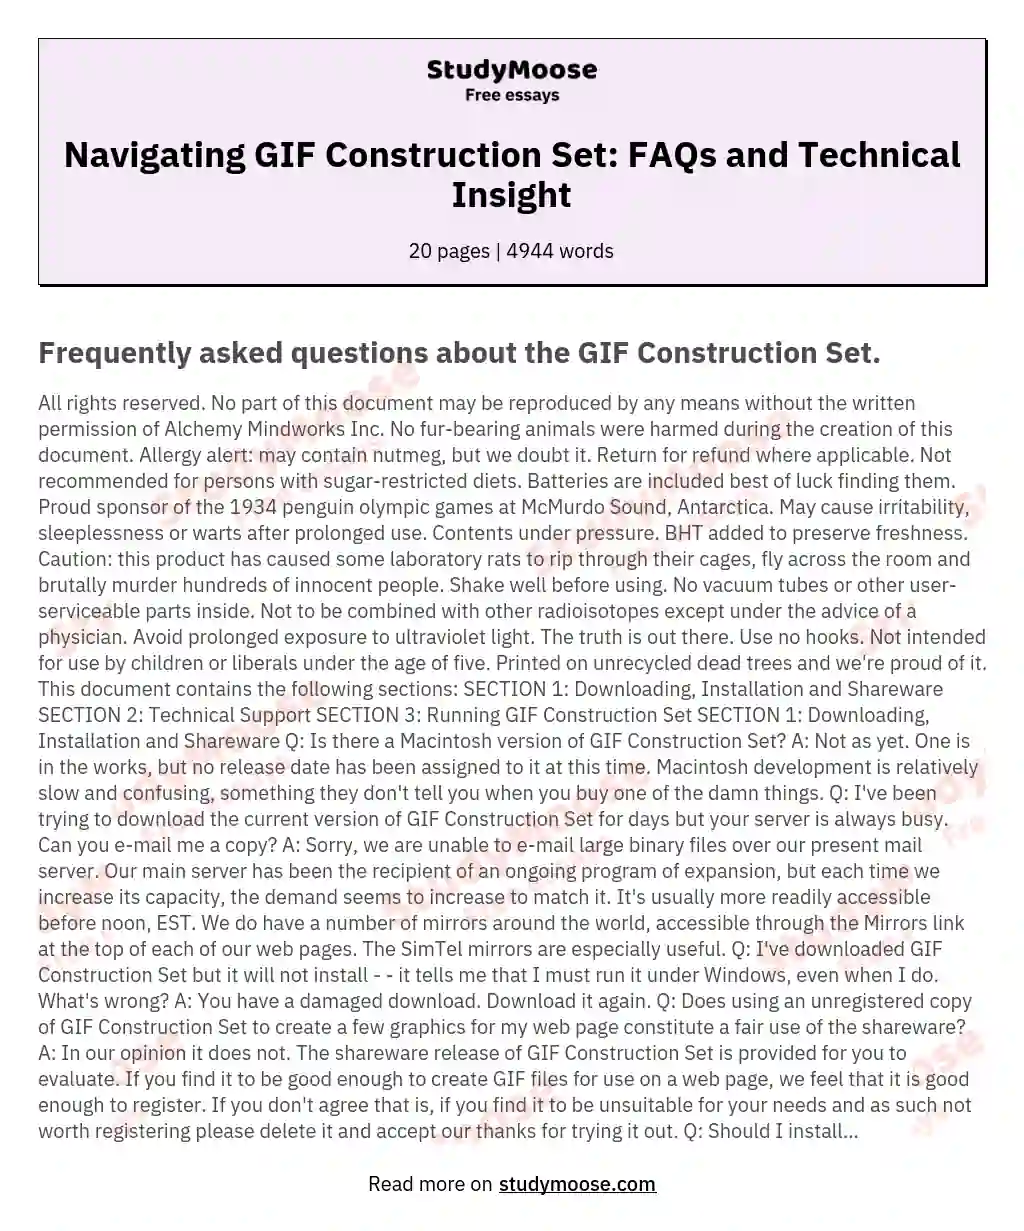 Navigating GIF Construction Set: FAQs and Technical Insight essay